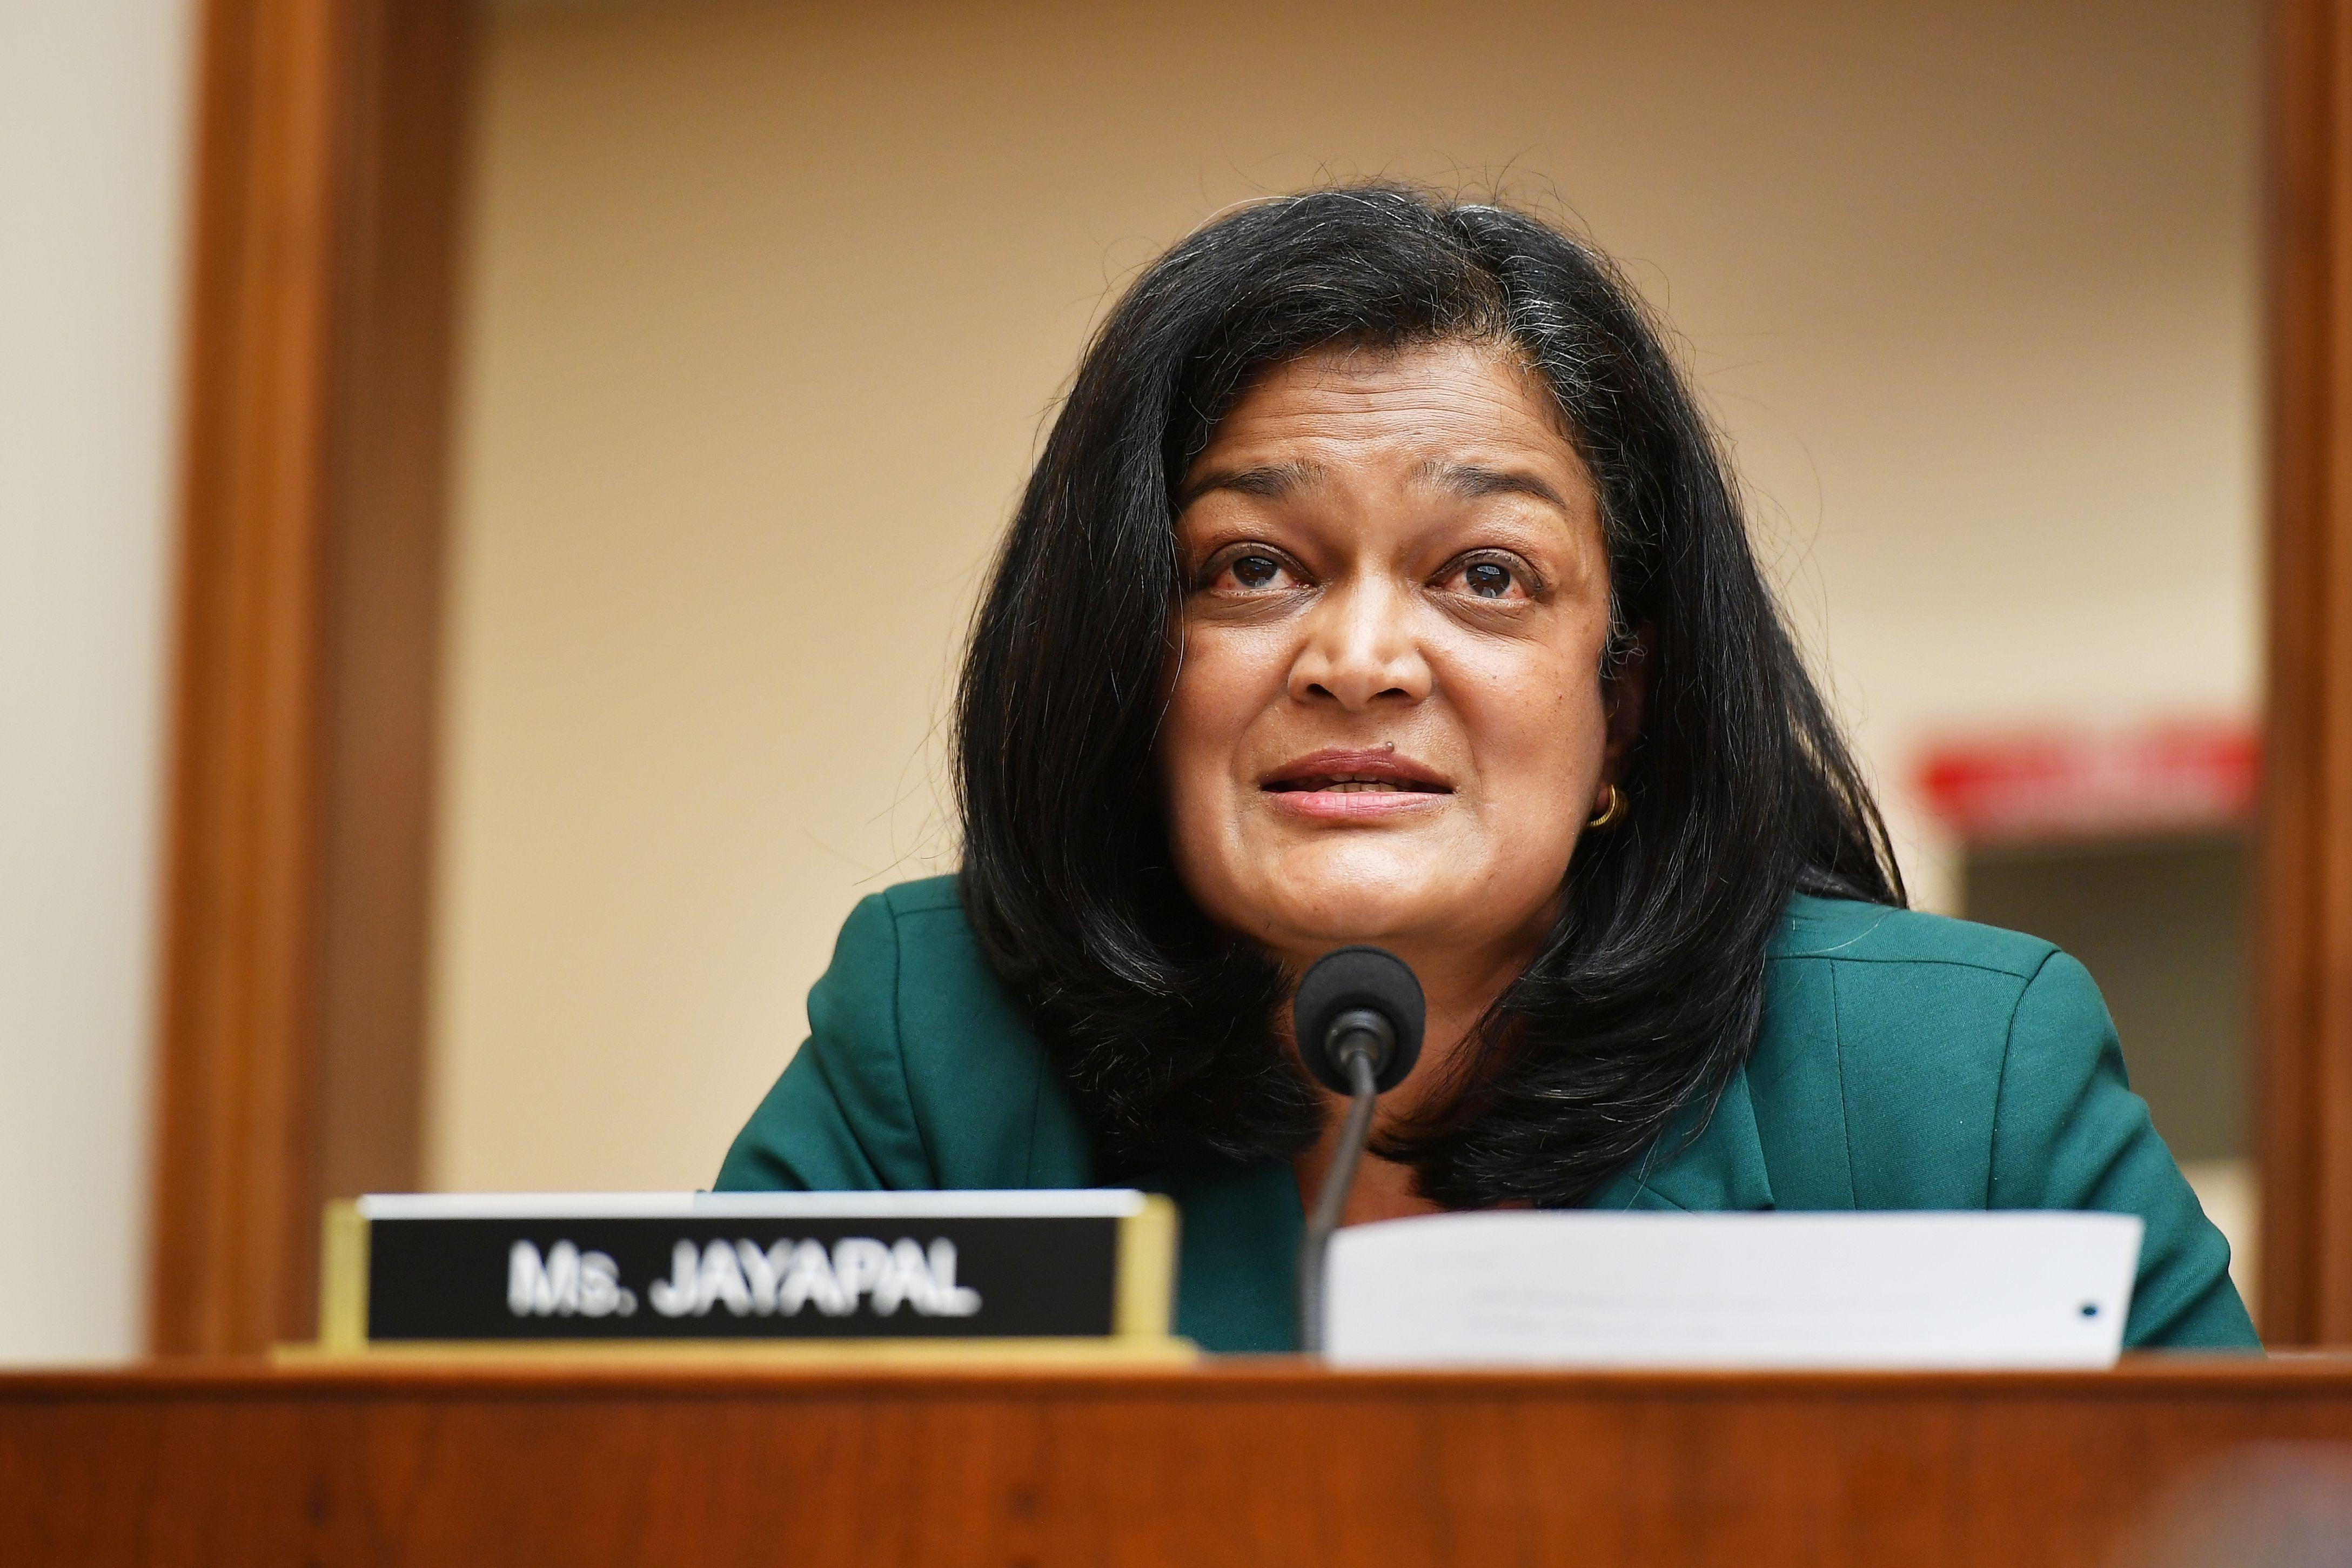 Pramila Jayapal speaks into a microphone. In front of her is a sign that says "Ms. Jayapal."